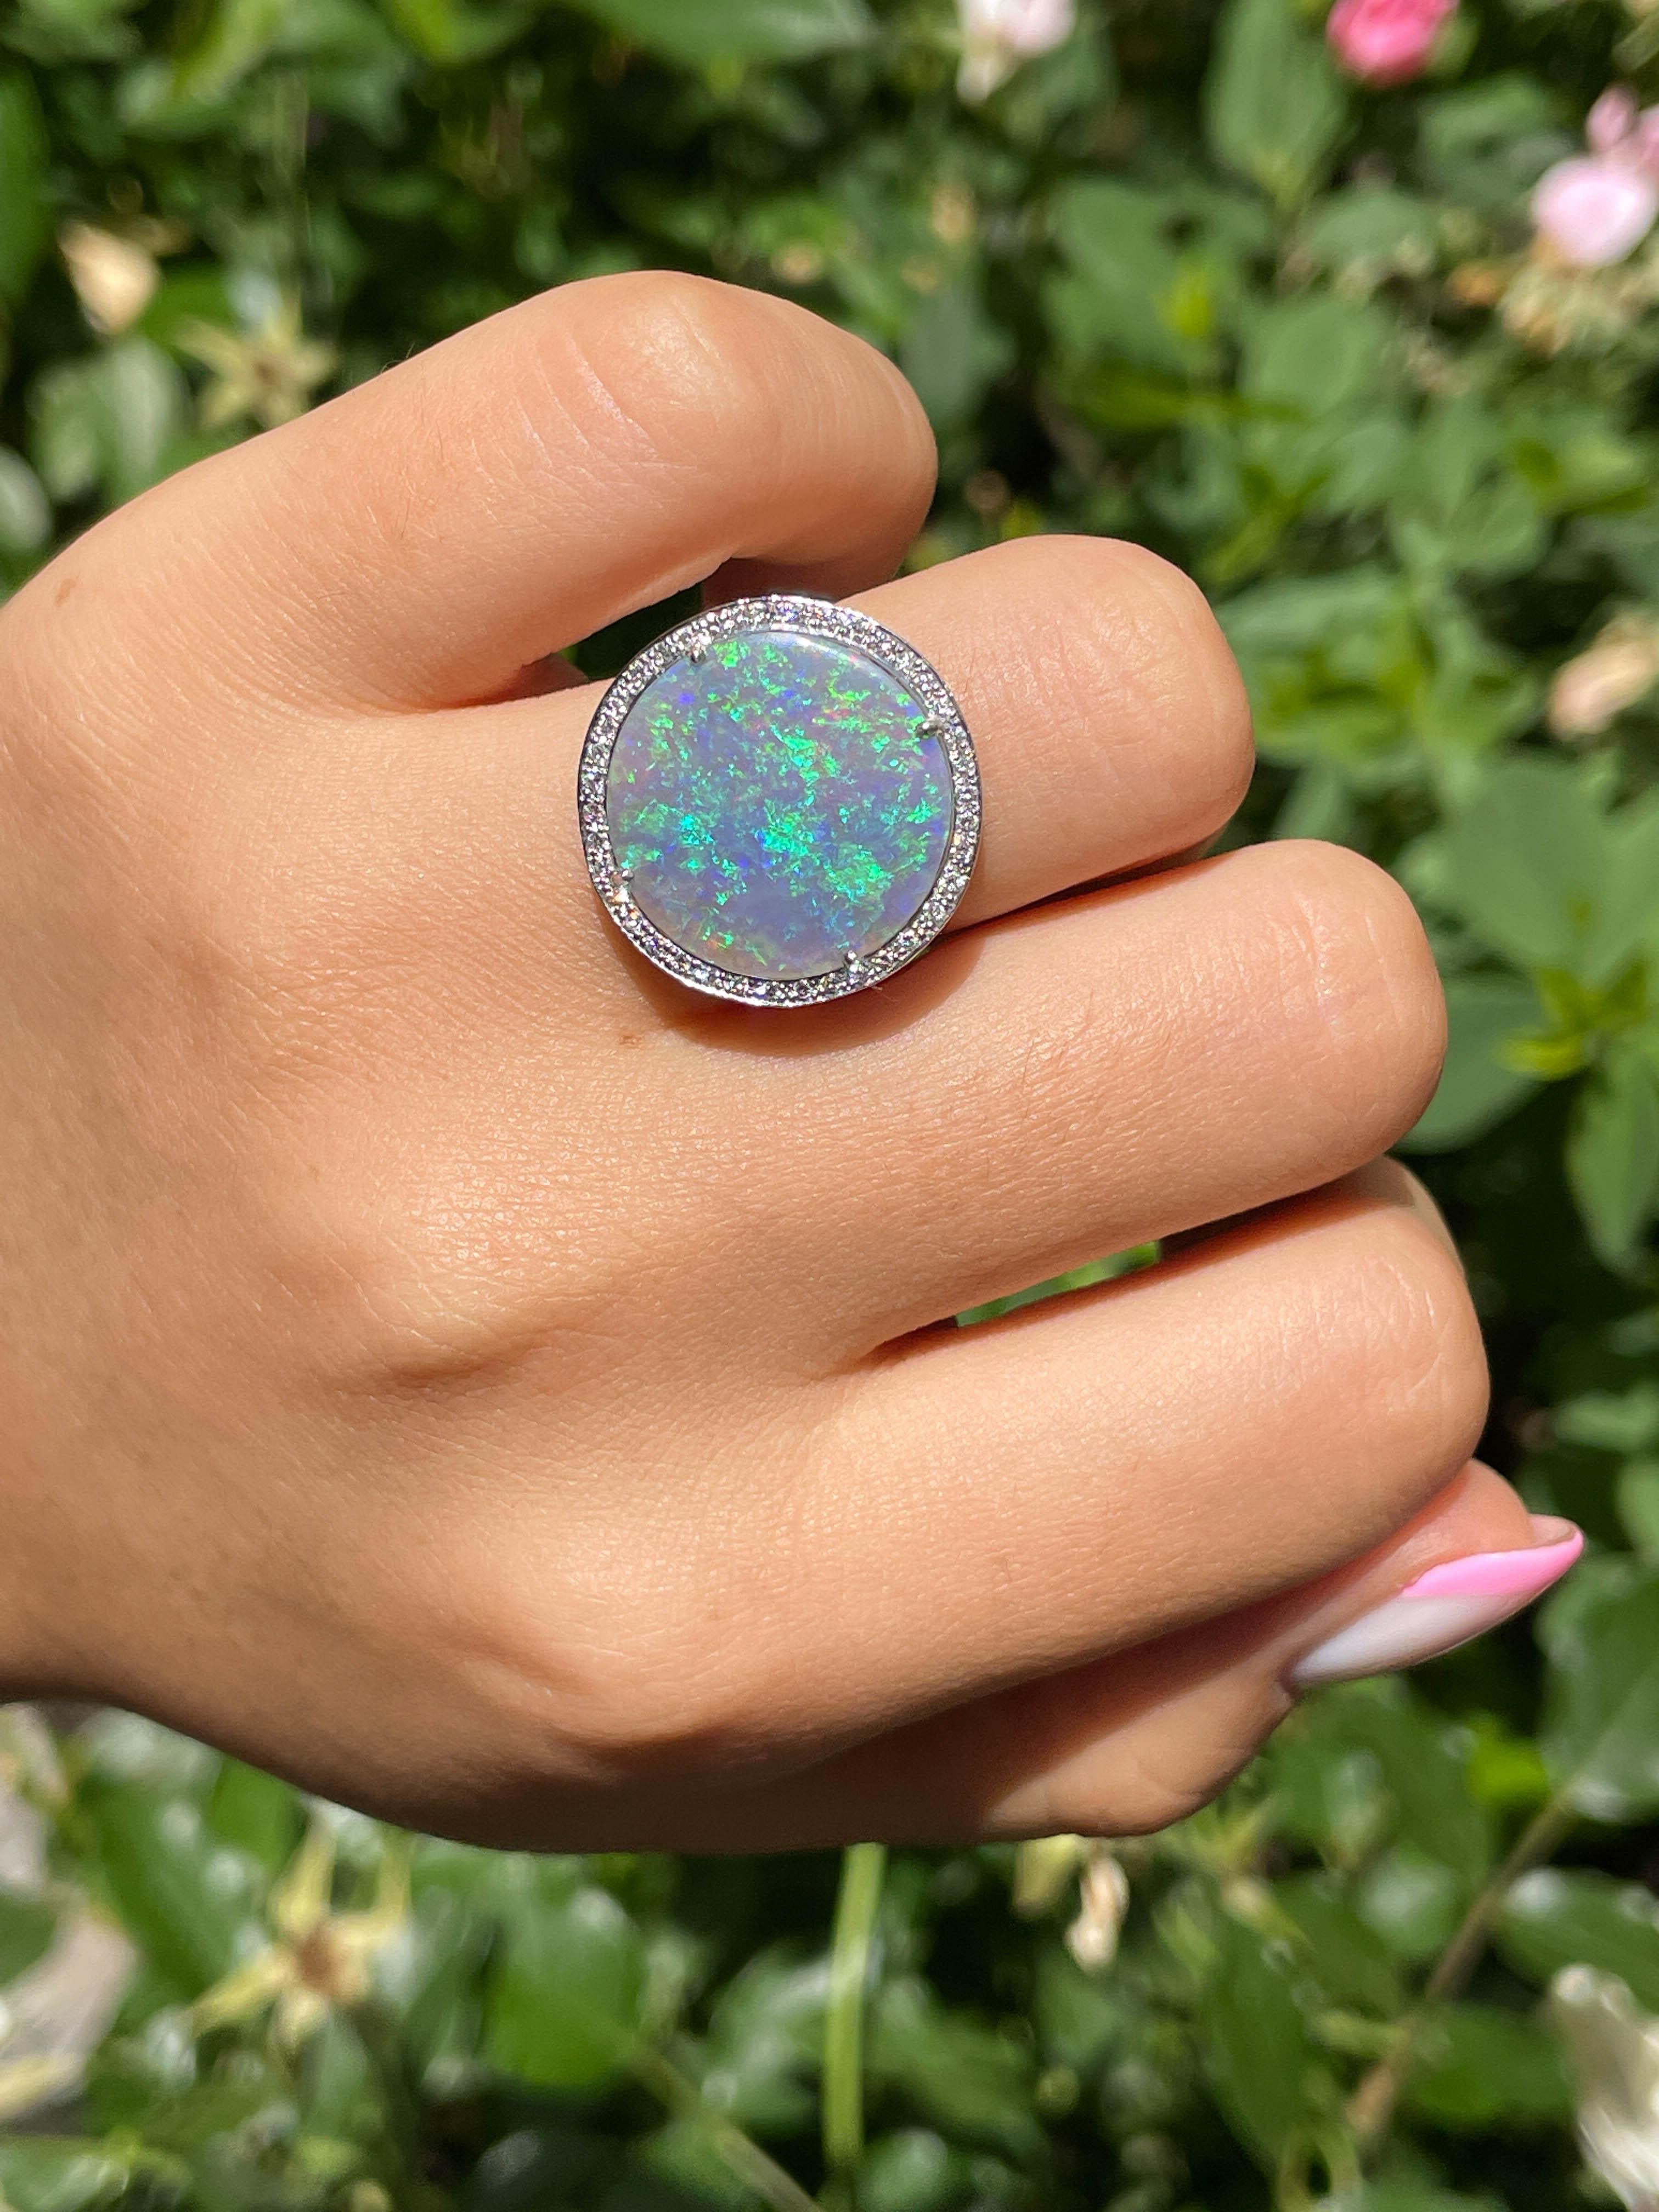 This Beautiful Vintage Australian Crystal Opal is set in Authentic GRAFF Platinum Ring, signed “GRAFF”. The Center Stone is Round Shape Cabochon Australian Crystal Opal. Simply Stunning! Gorgeous Array of All the Colors, weighing 4.70ct (estimated),